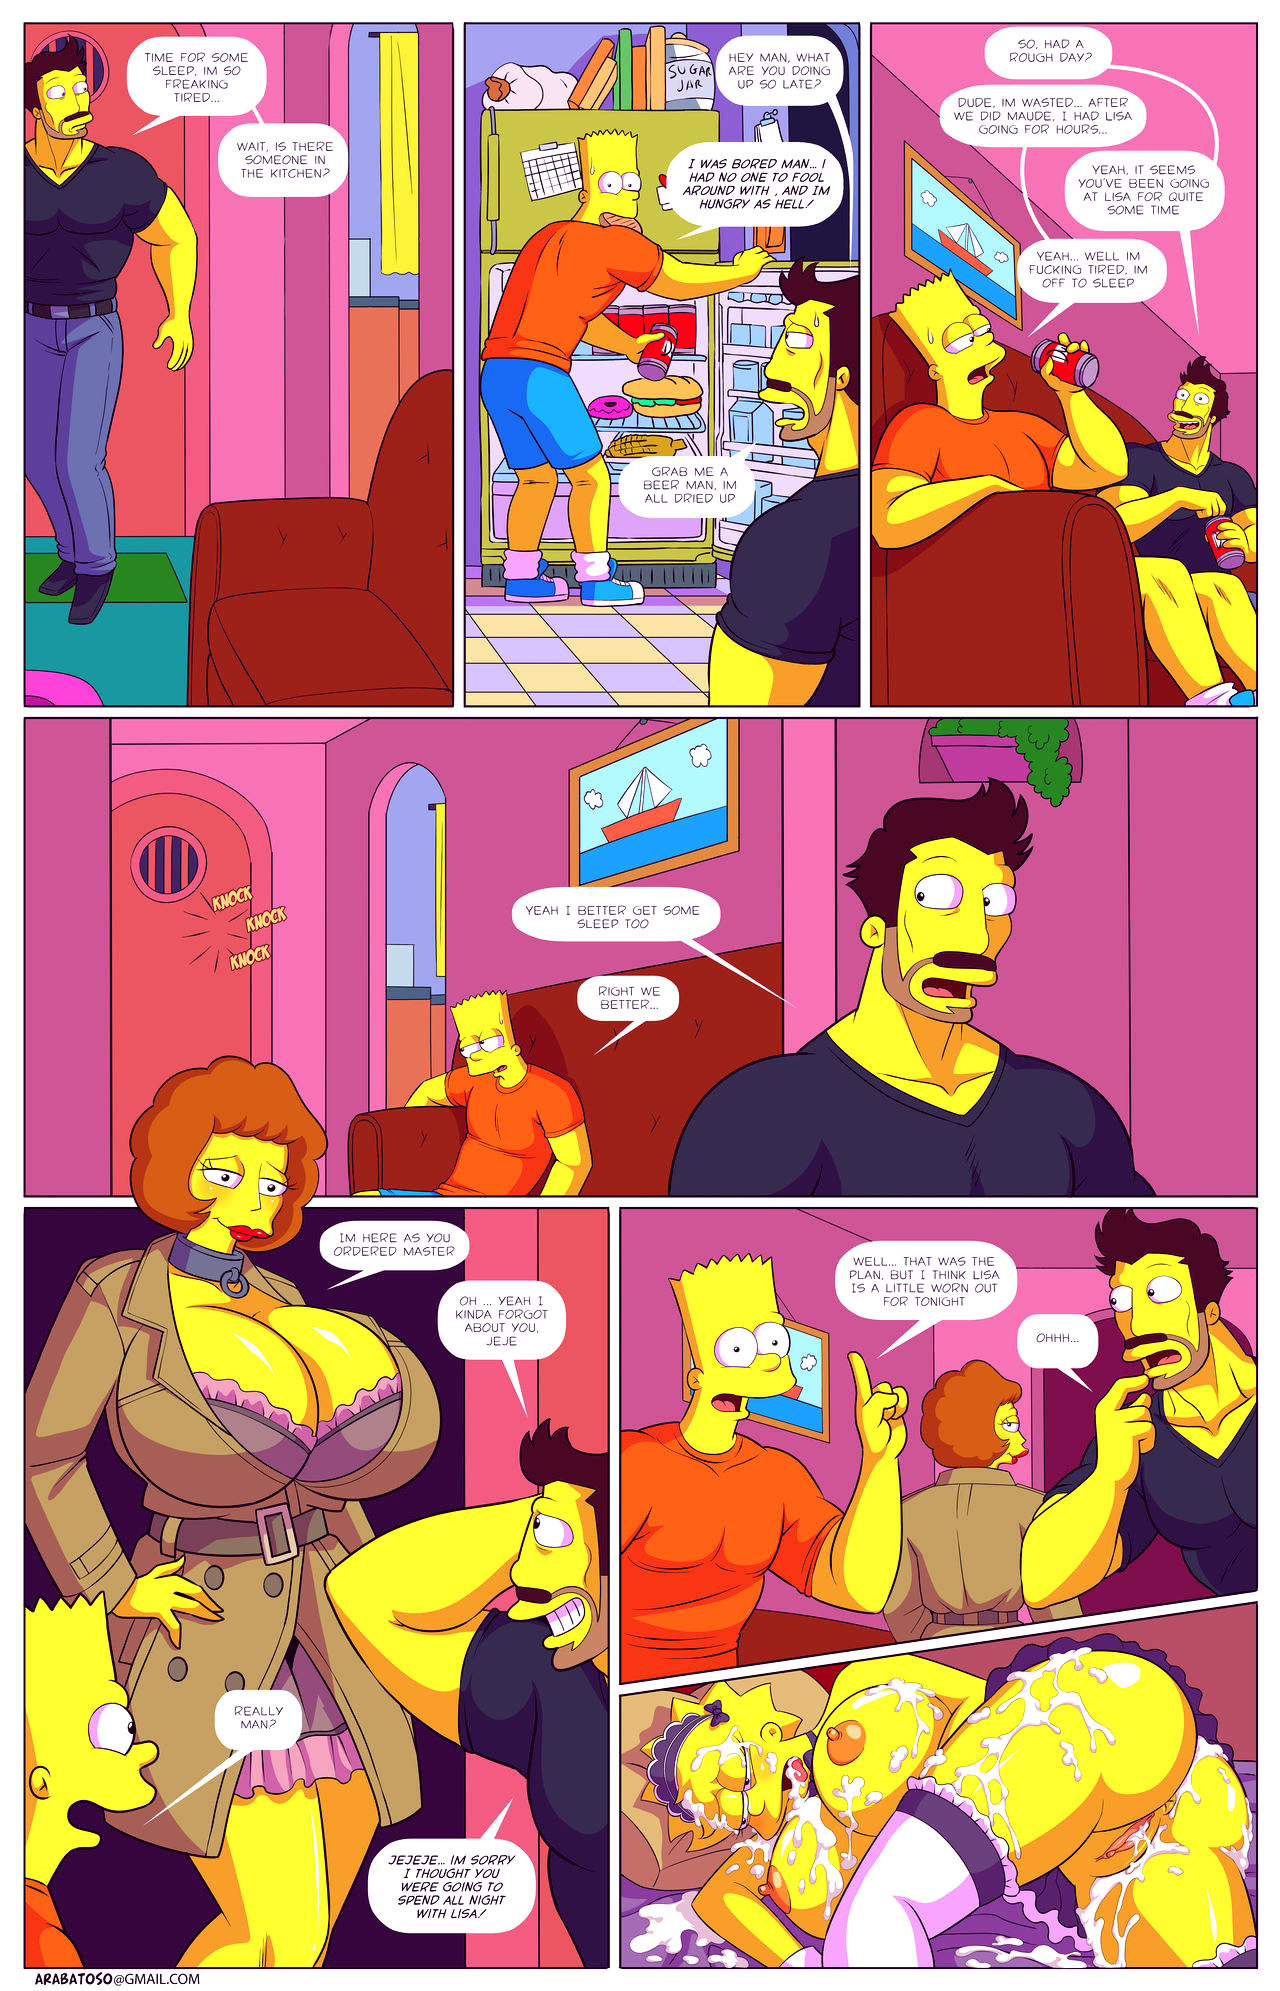 Darrens adventure or welcome to springfield porn comic picture 47